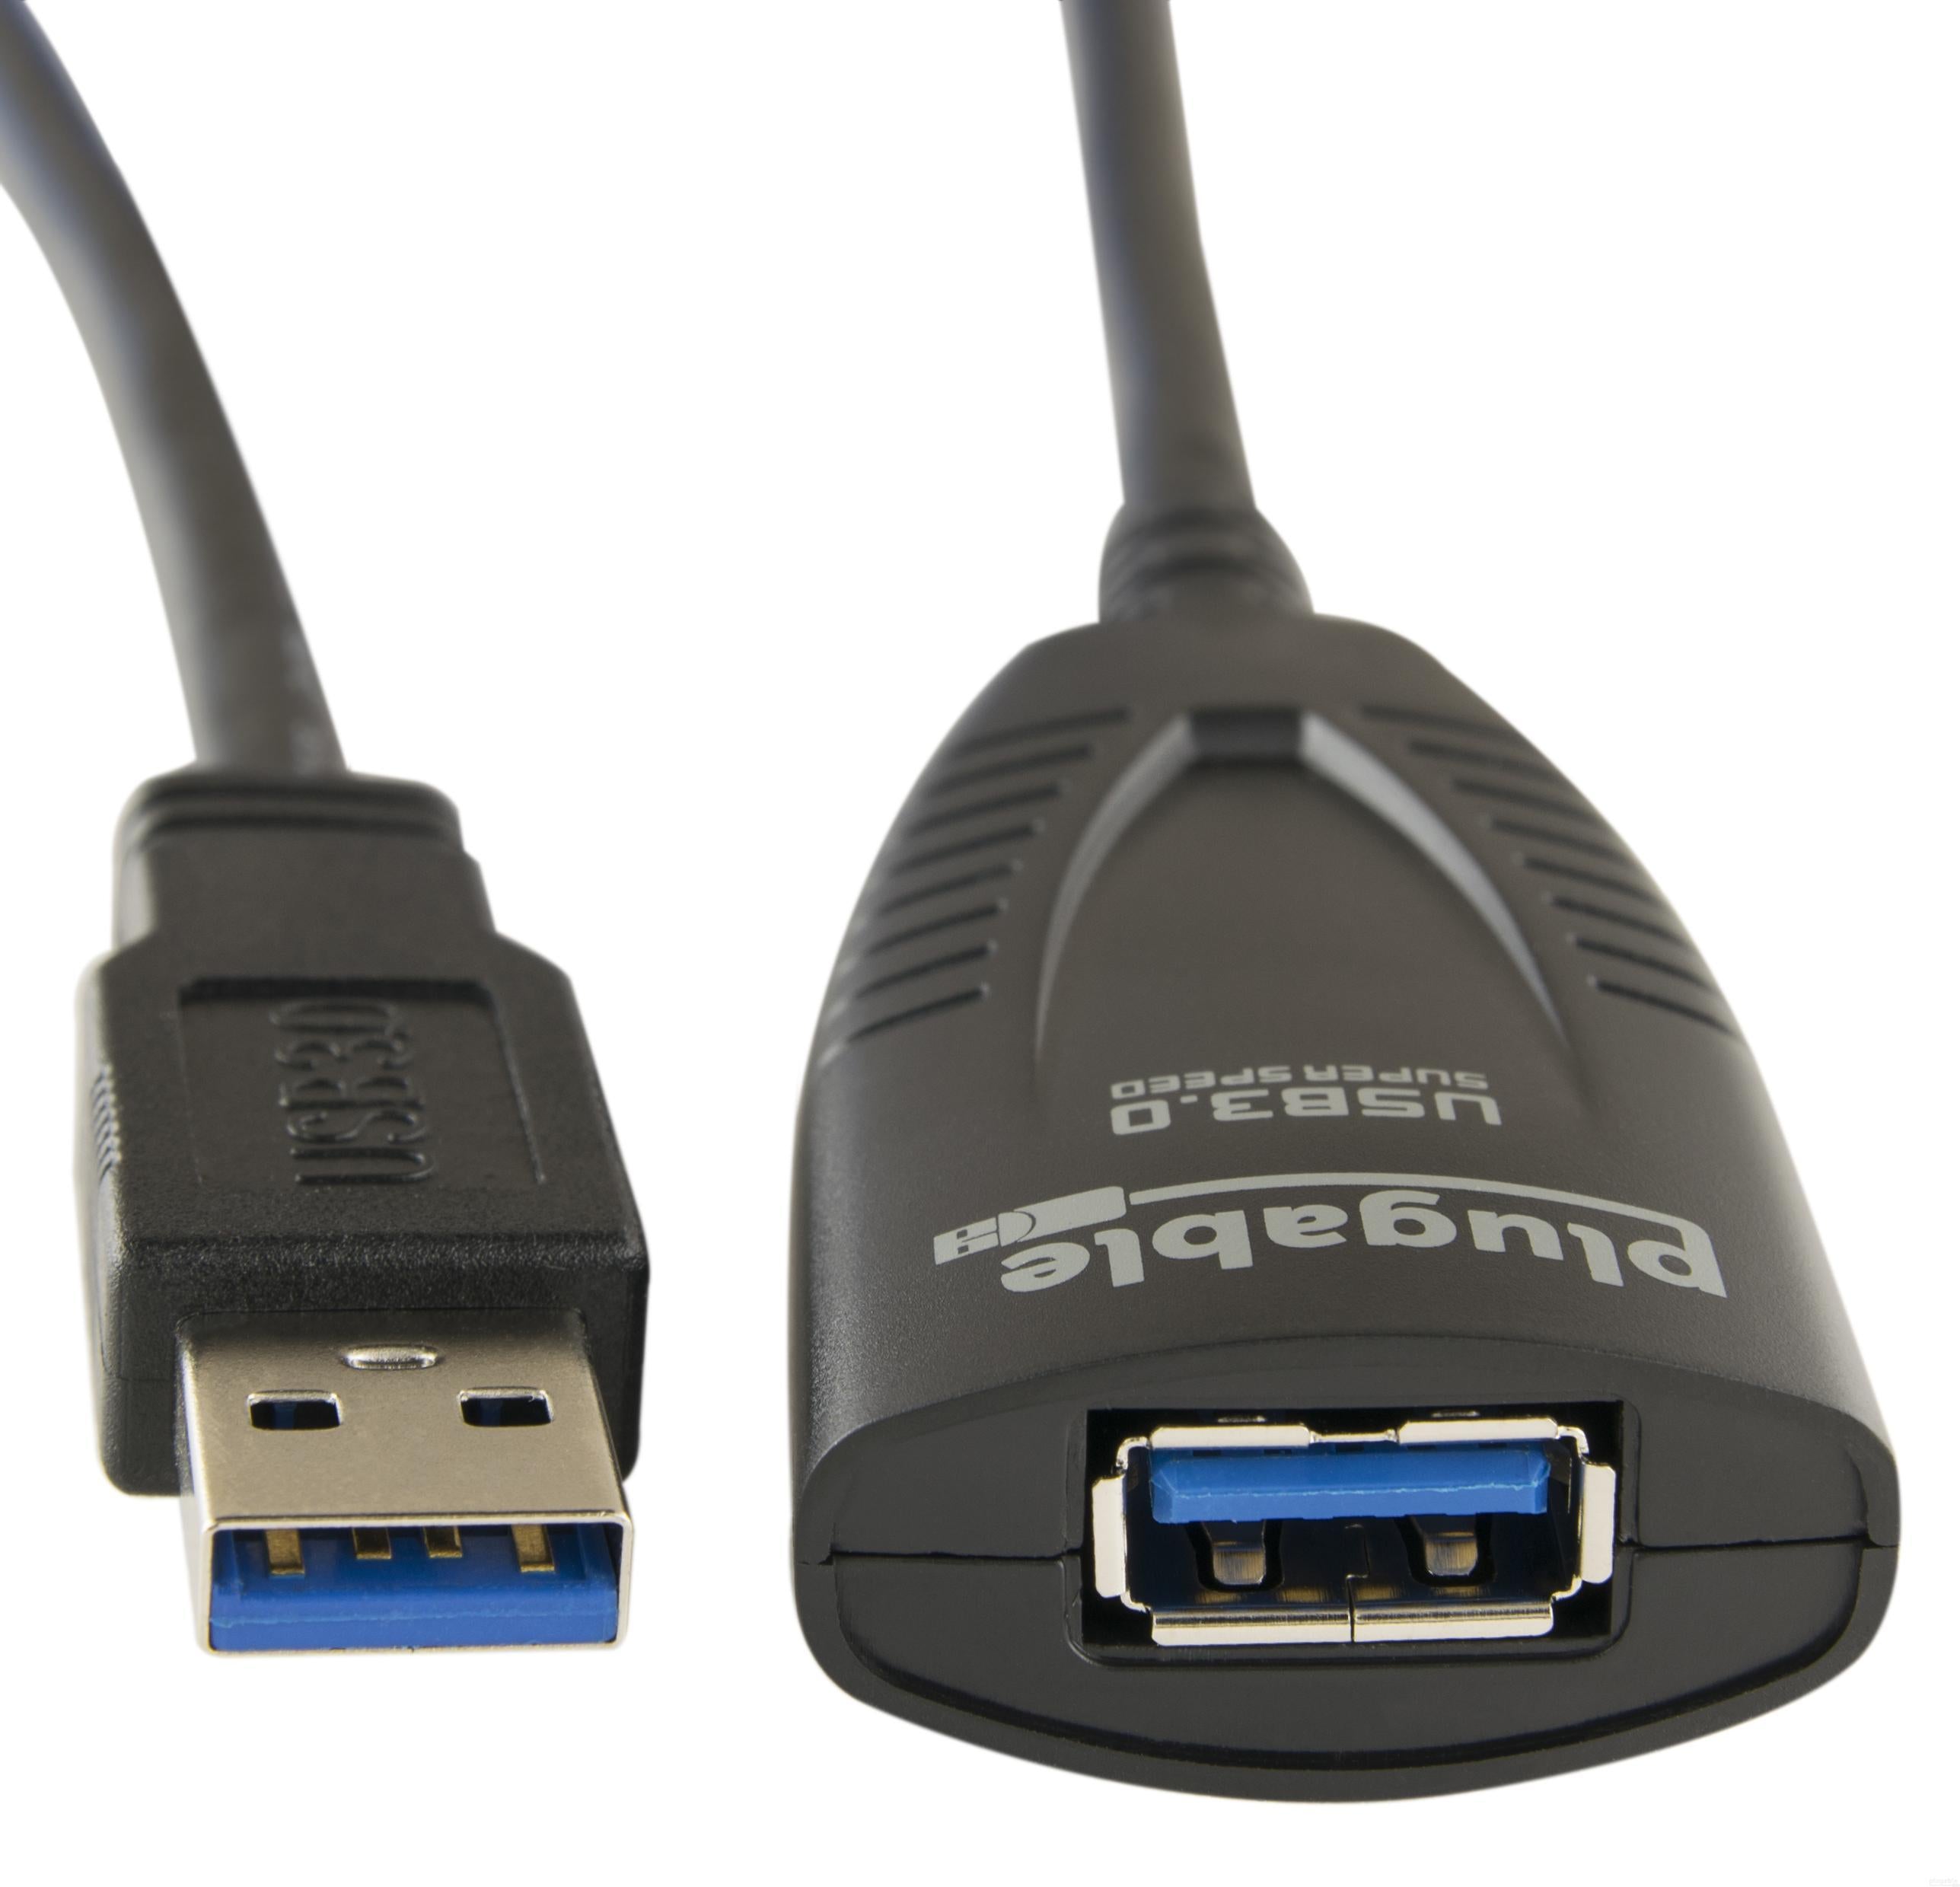 Plugable USB 3.0 5M (16ft) Extension Cable Power Adapter and Plugable Technologies